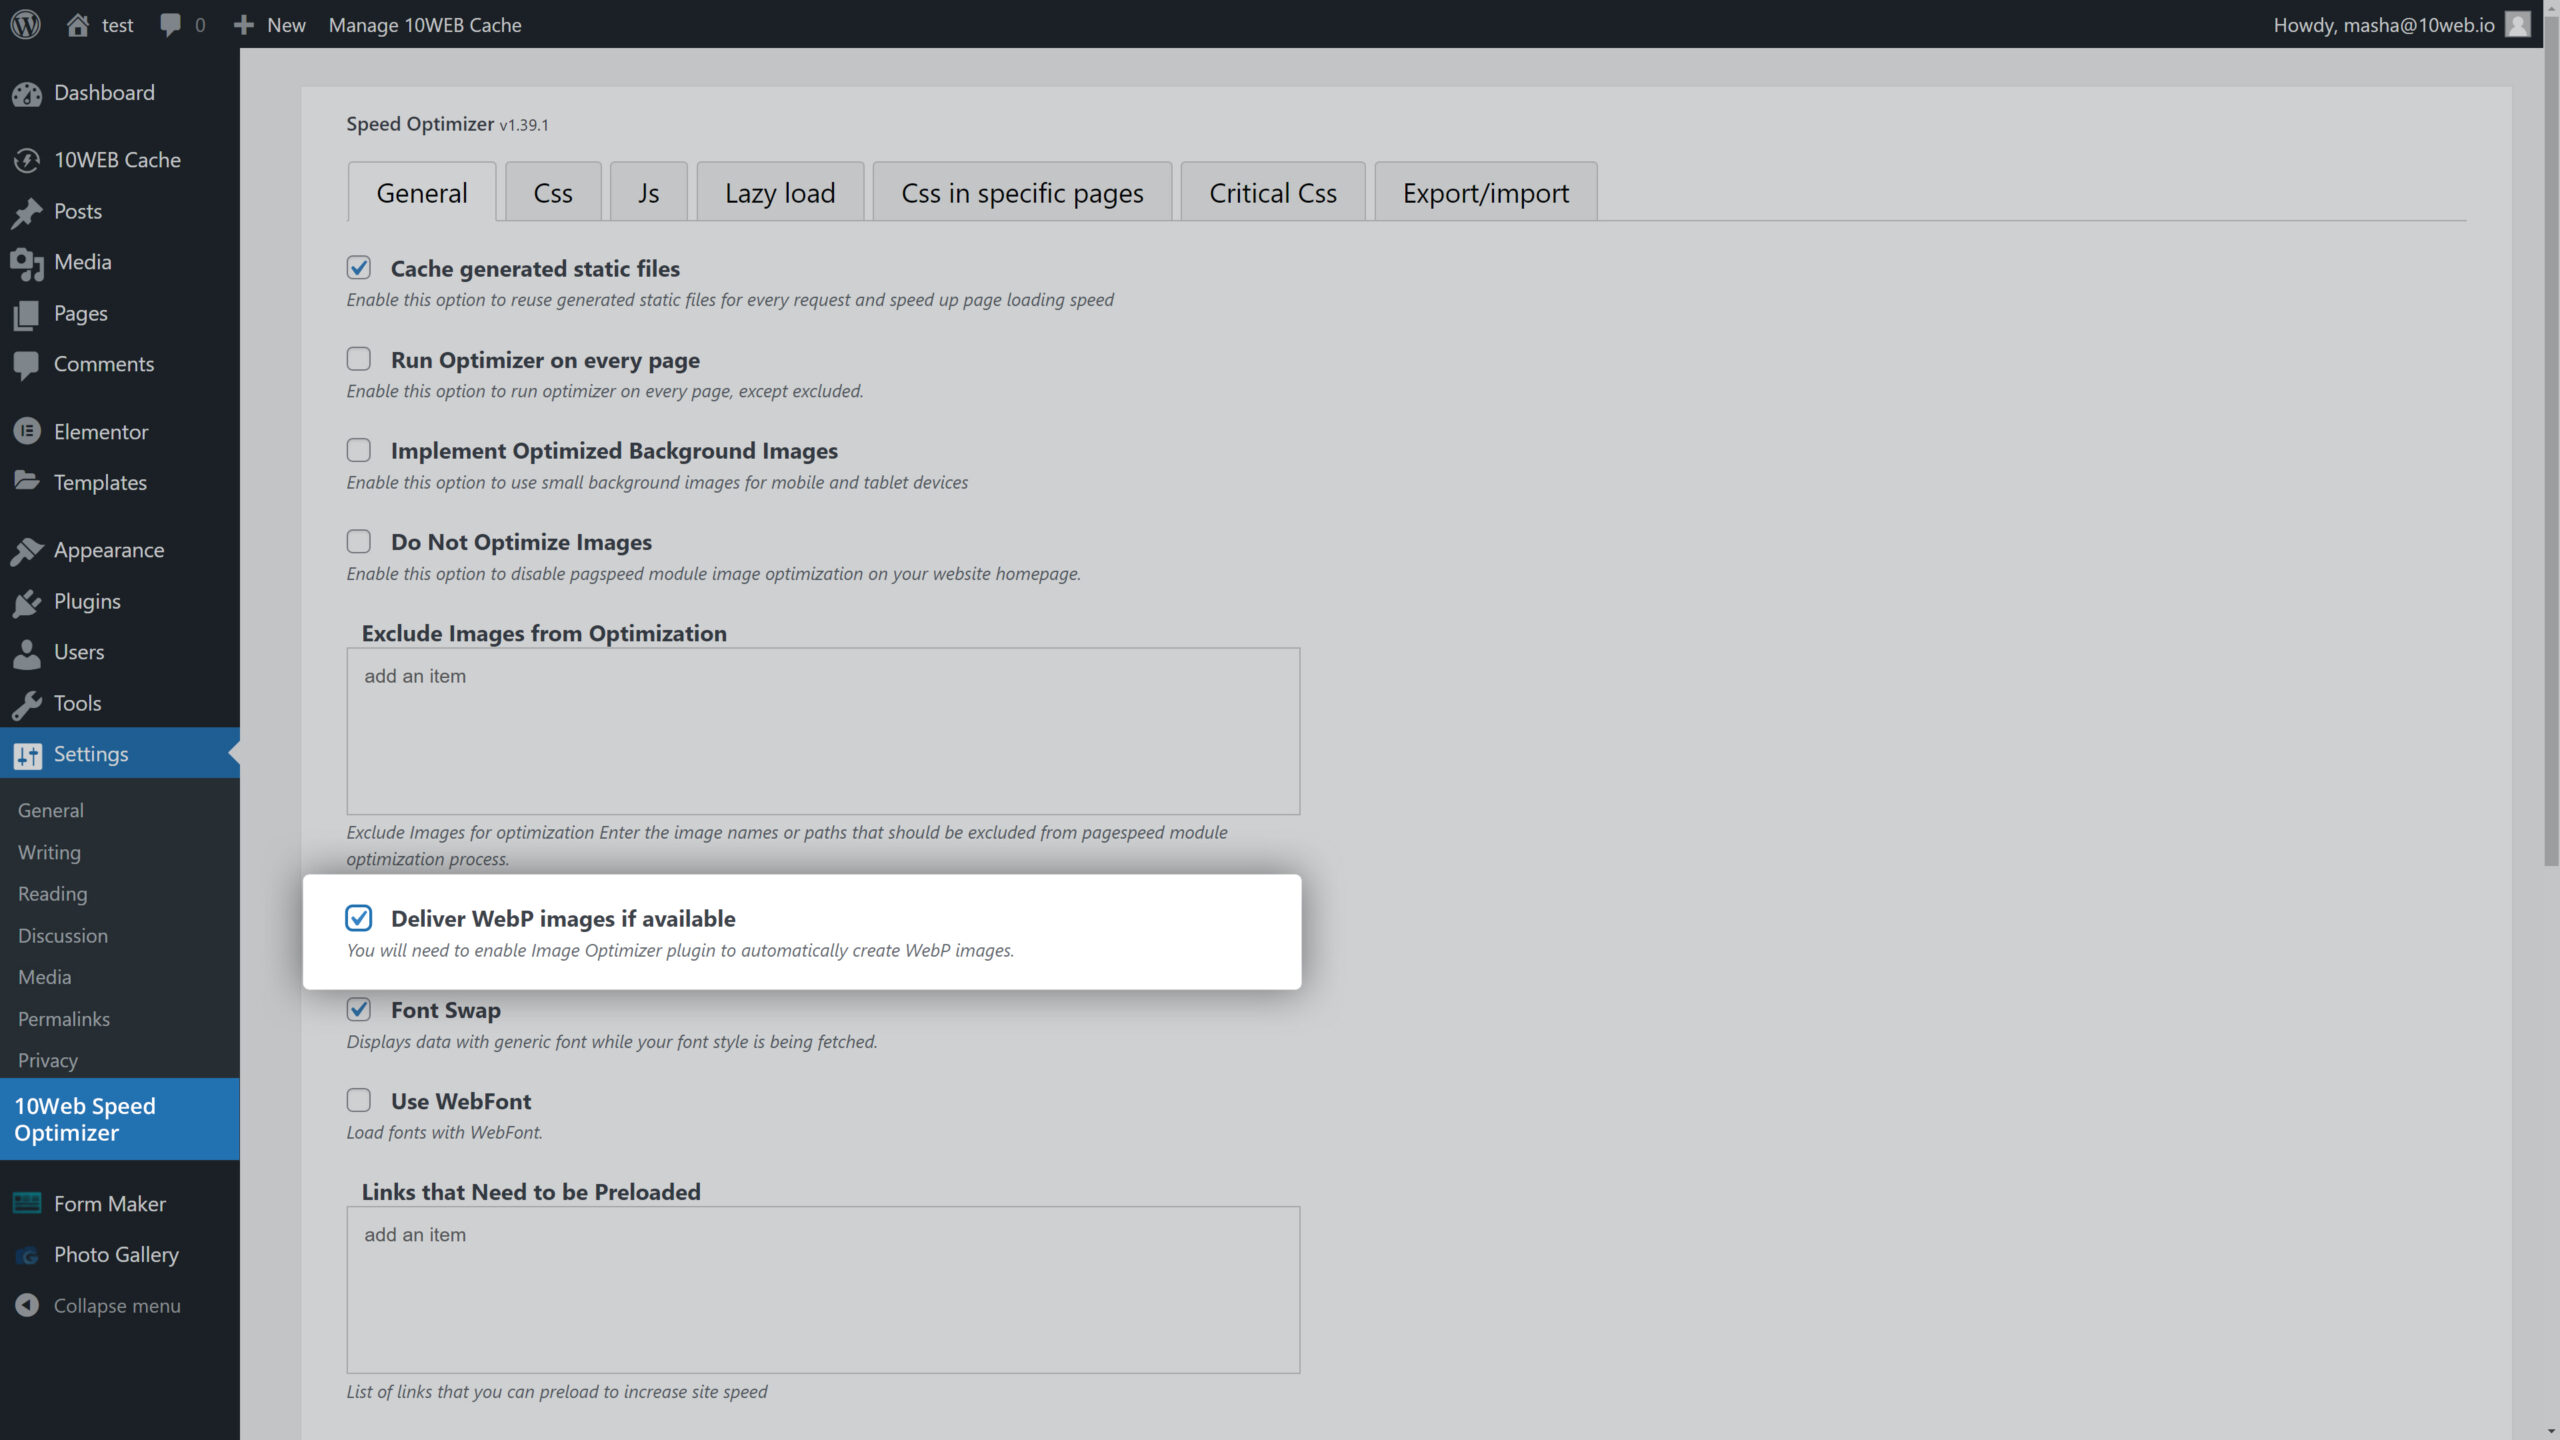 WP admin dashboard General settings of the the 10Web speed optimizer